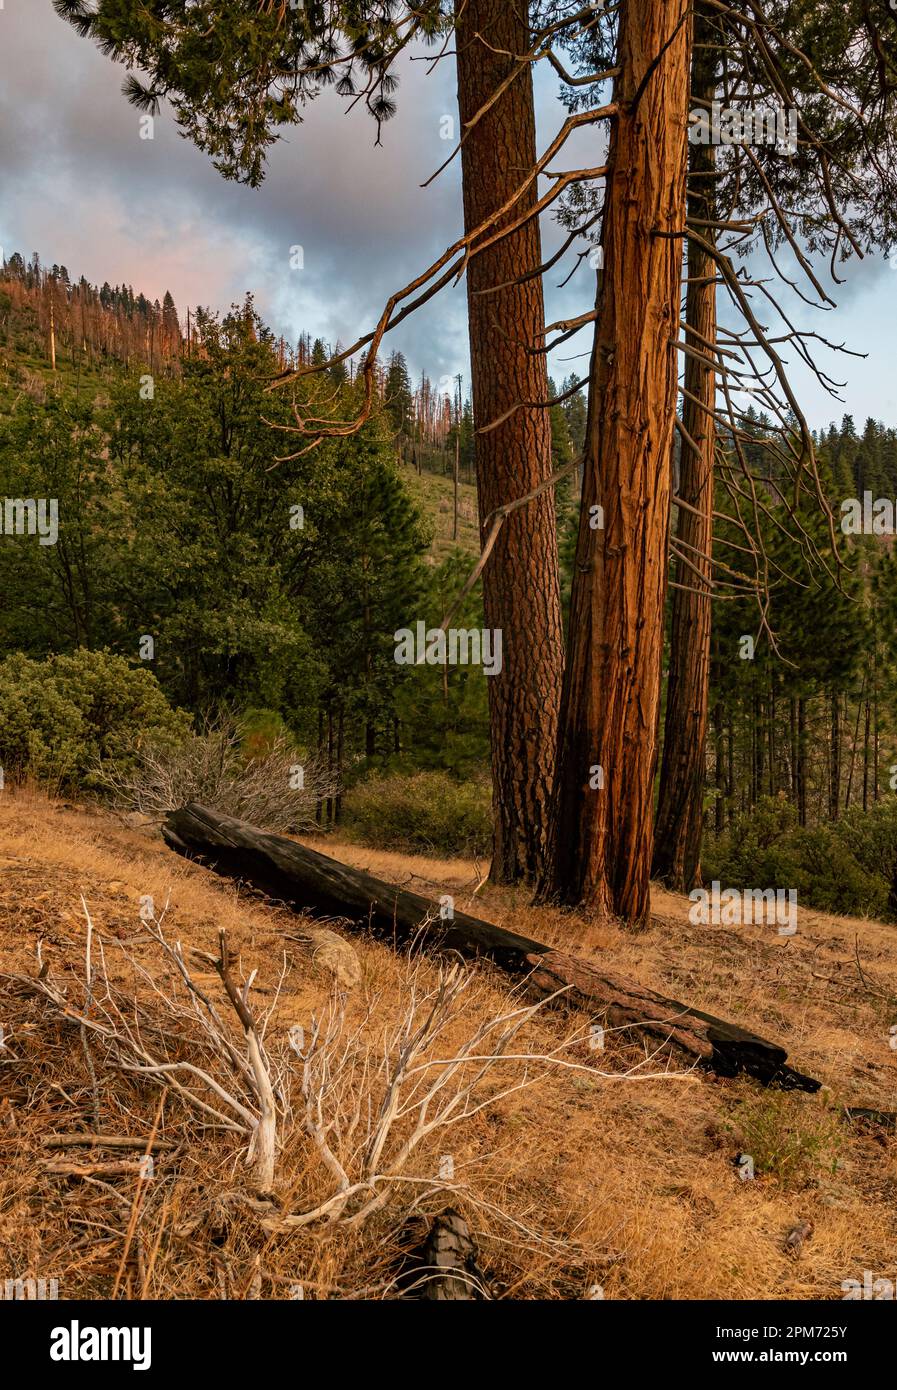 Survivors from a forest fire stand behind remnants of the fire, Yosemite National Park, California Stock Photo